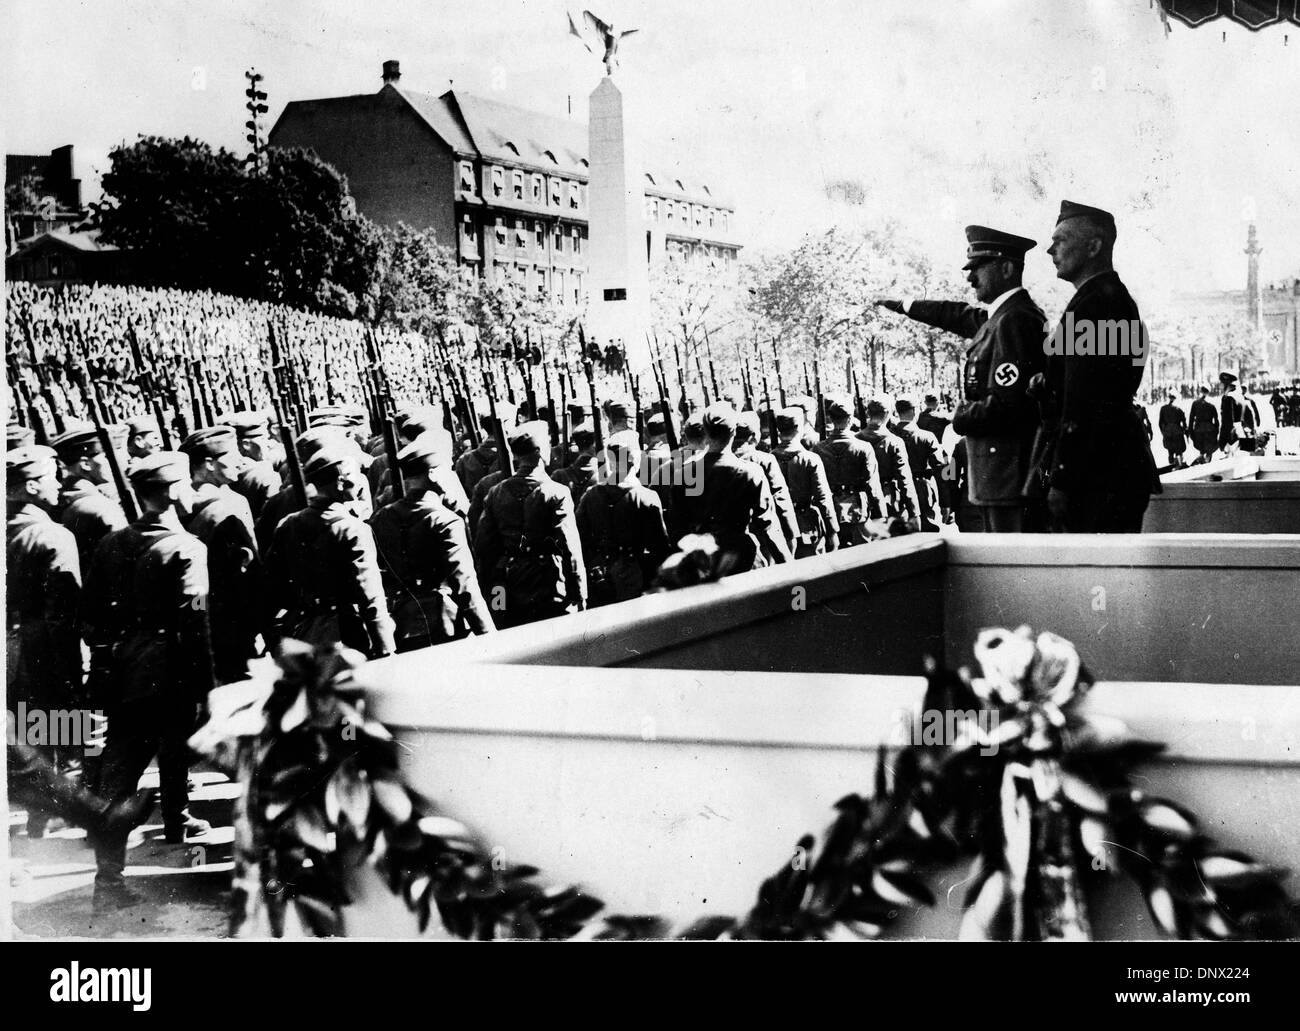 June 6, 1939 - Berlin, Germany - ADOLF HITLER thanking his condor legion for their services in Spain. Adolf Hitler (April 20, 1889-April 30, 1945) was the Fuhrer und Reichskanzler (Leader and Imperial chancellor) of Germany from 1933 to his death. He was leader of the National Socialist German Workers Party (NSDAP), better known as the Nazi Party. (Credit Image: © KEYSTONE Pictures Stock Photo